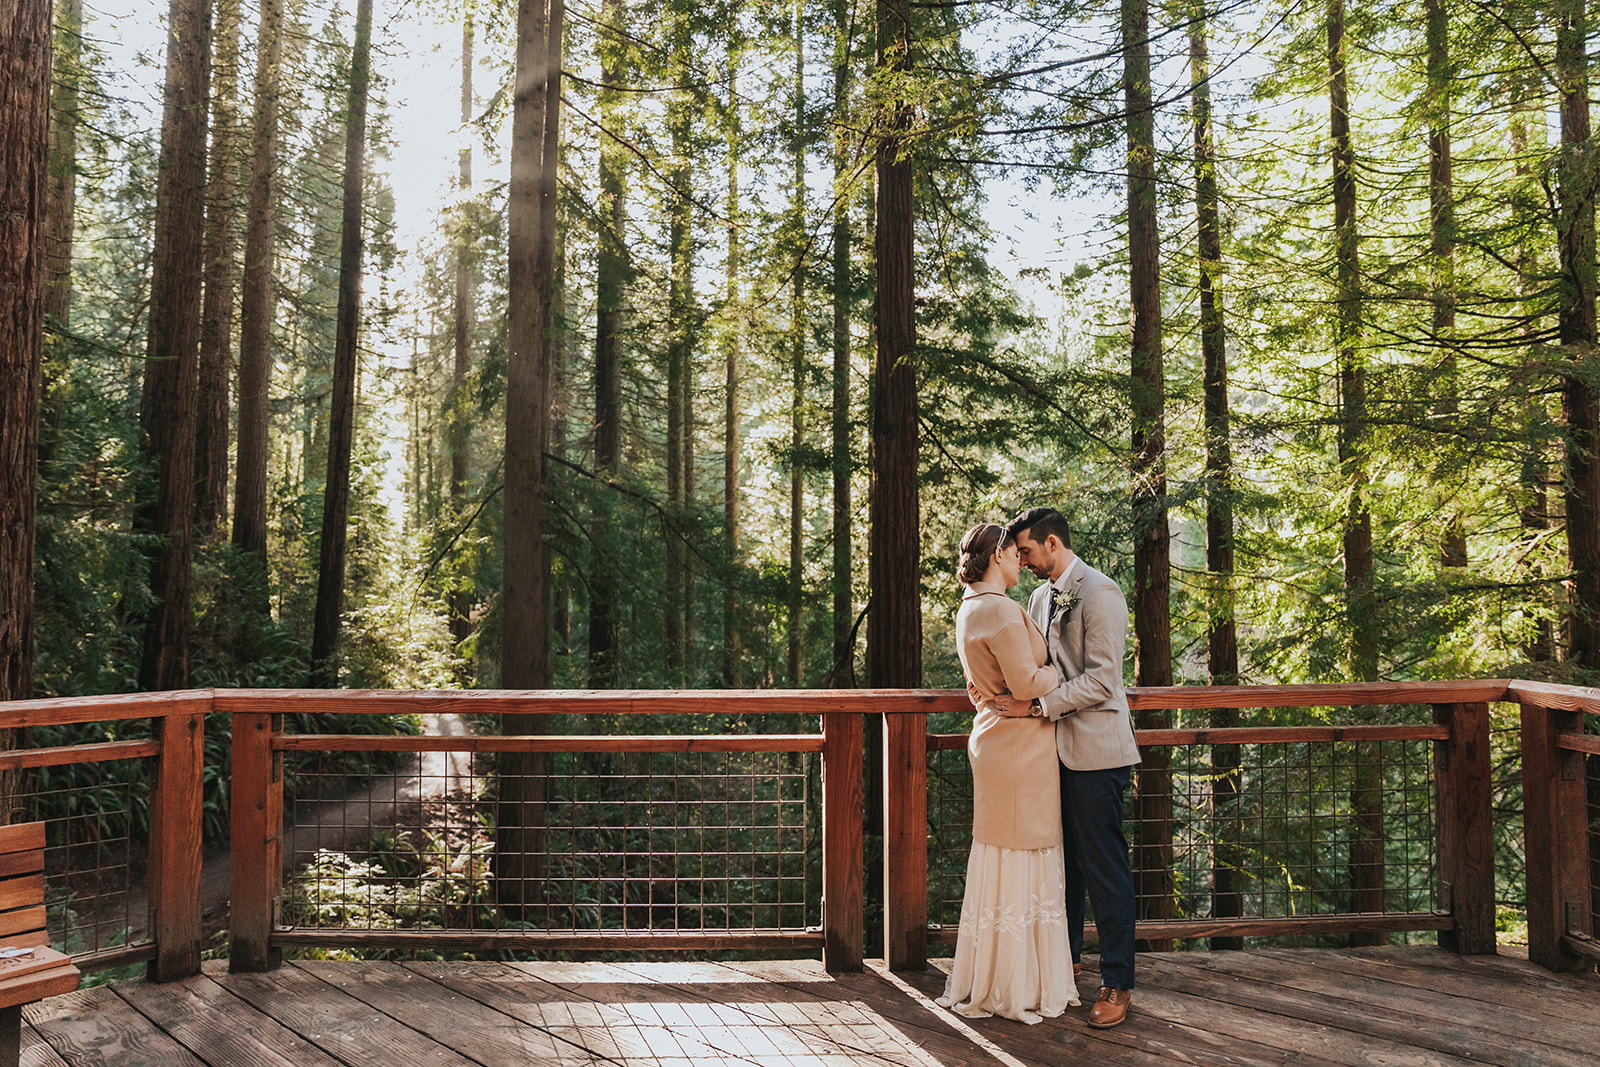 should we elope - a couple holds each other while standing on a wooden deck overlooking a forest